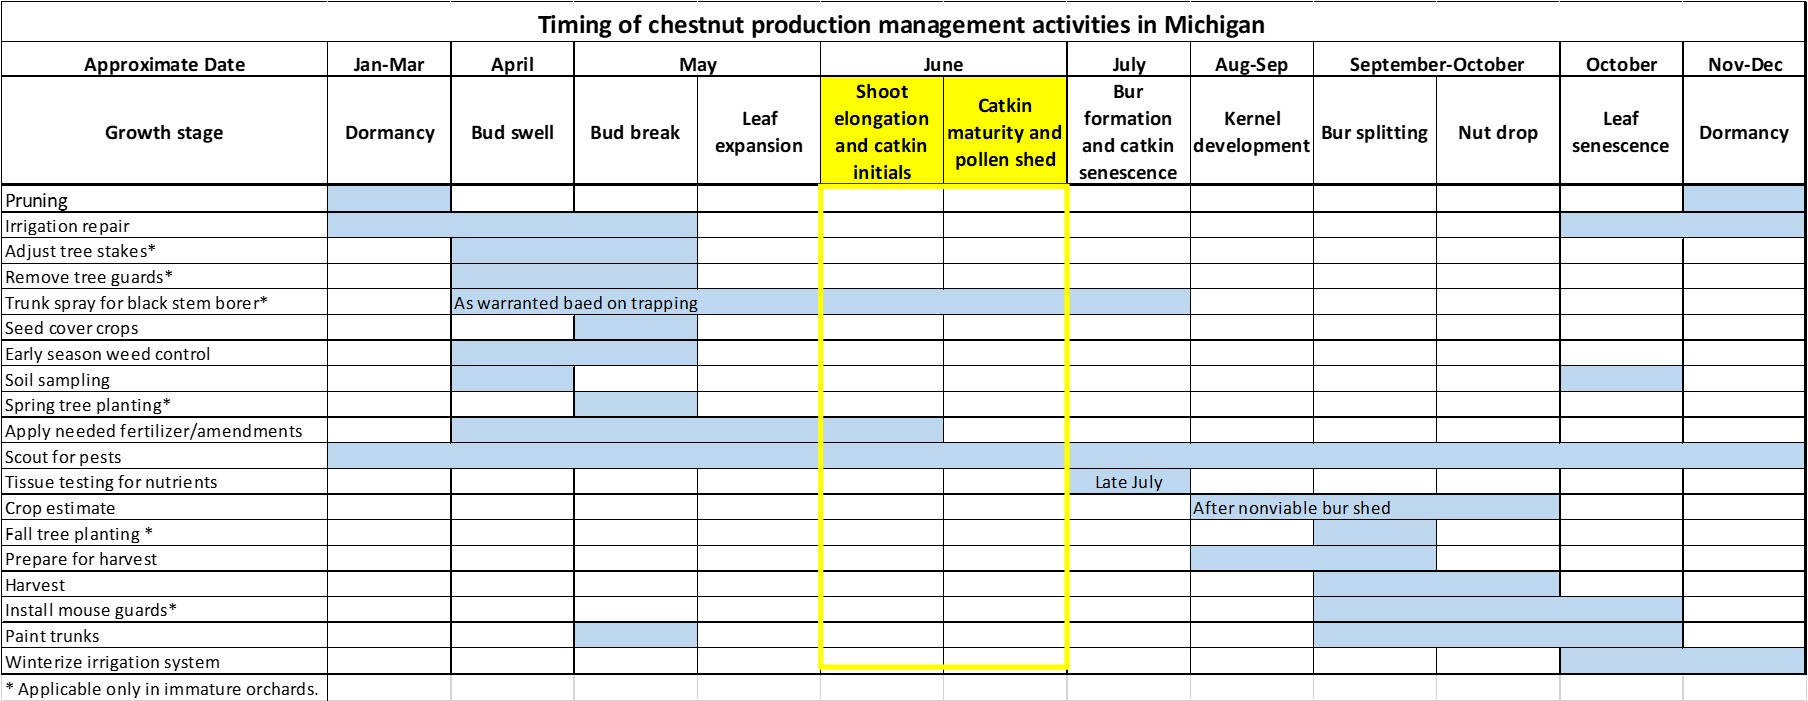 Graph of chestnut timing activities